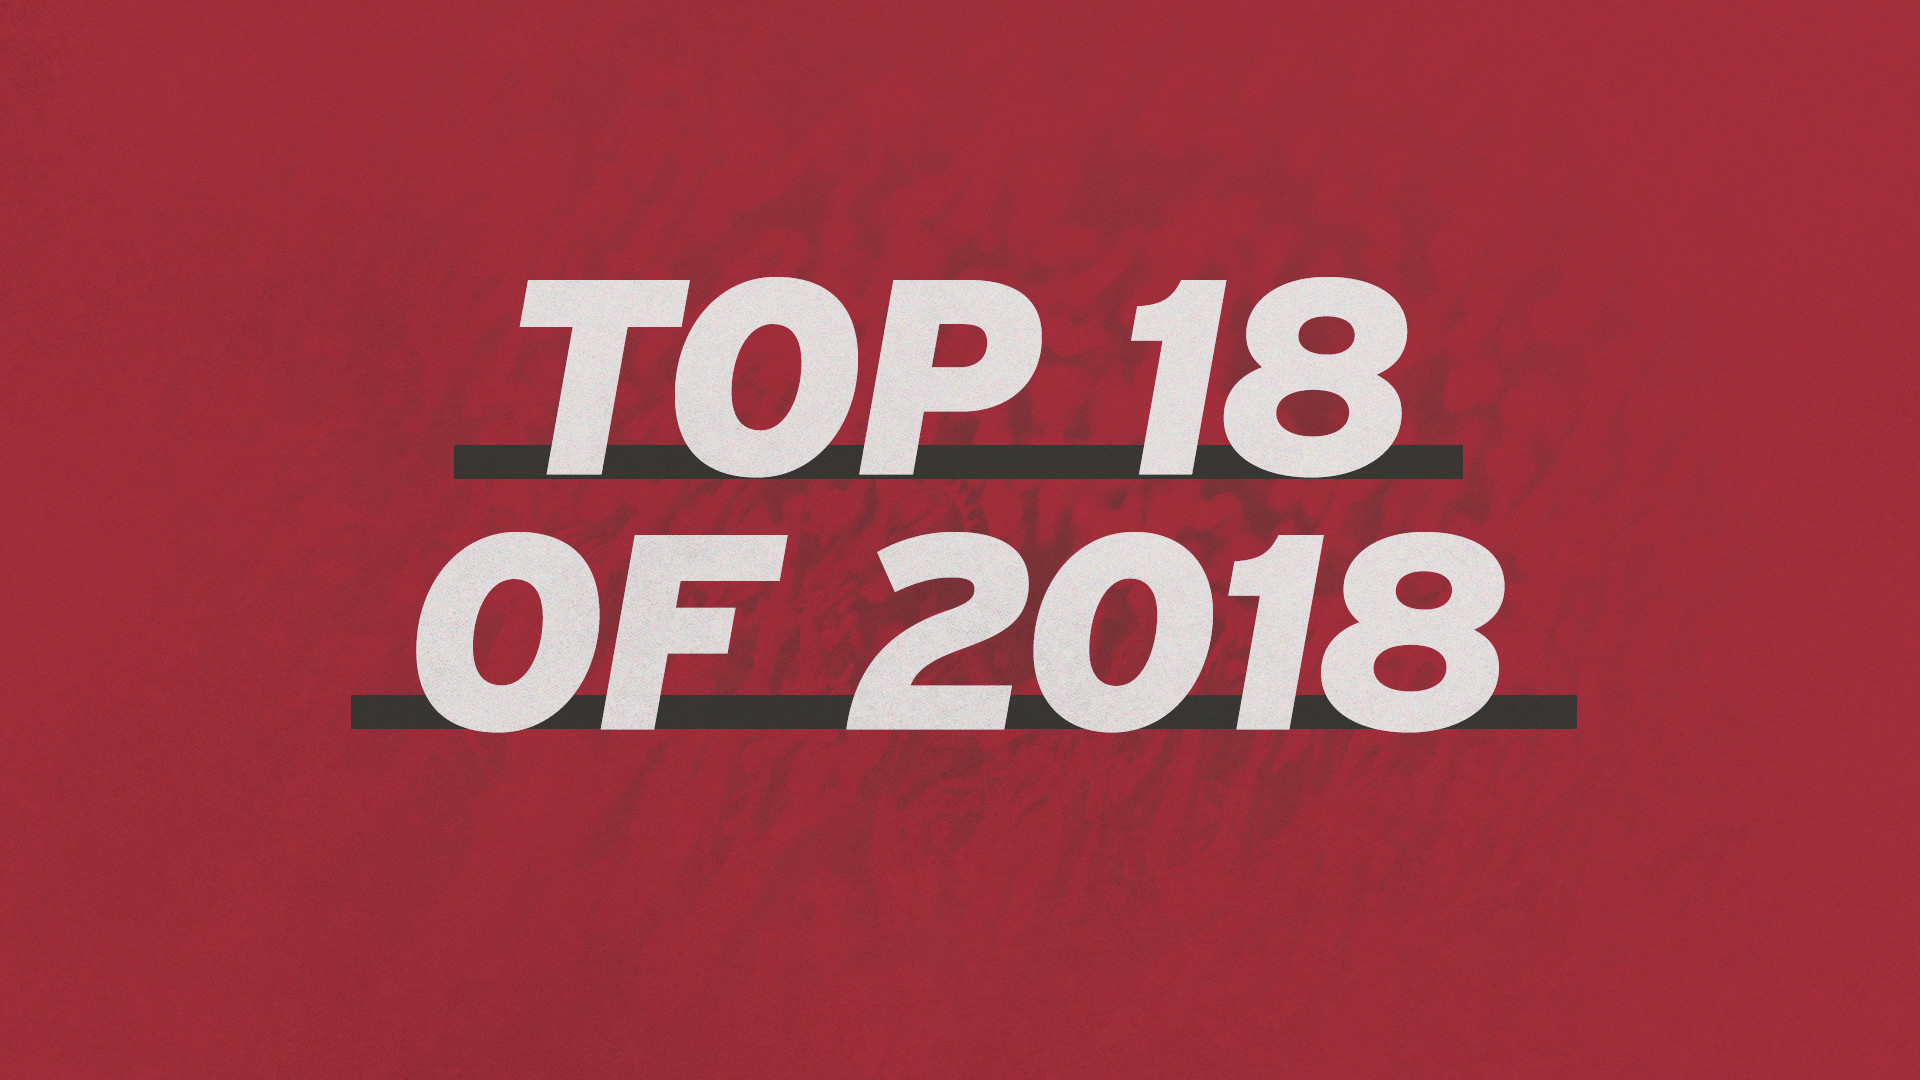 1920x1080 Top 18 Moments of 2018